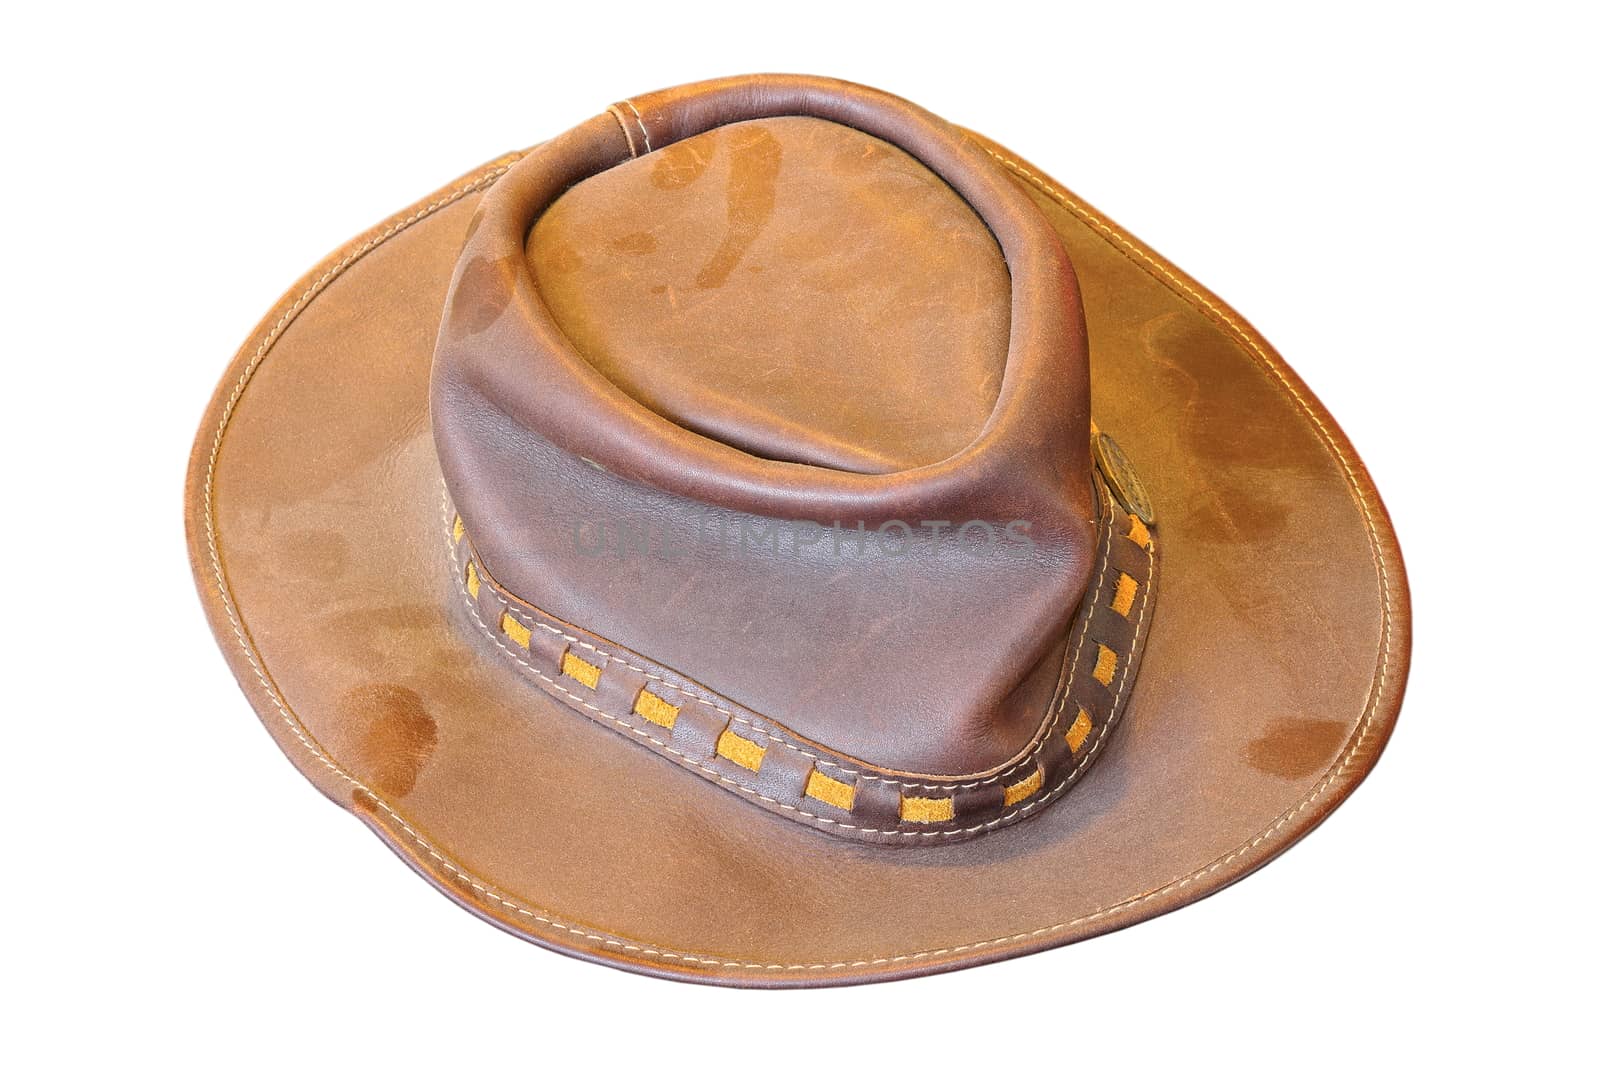 old dusty hat made of real leather, isolation over white background